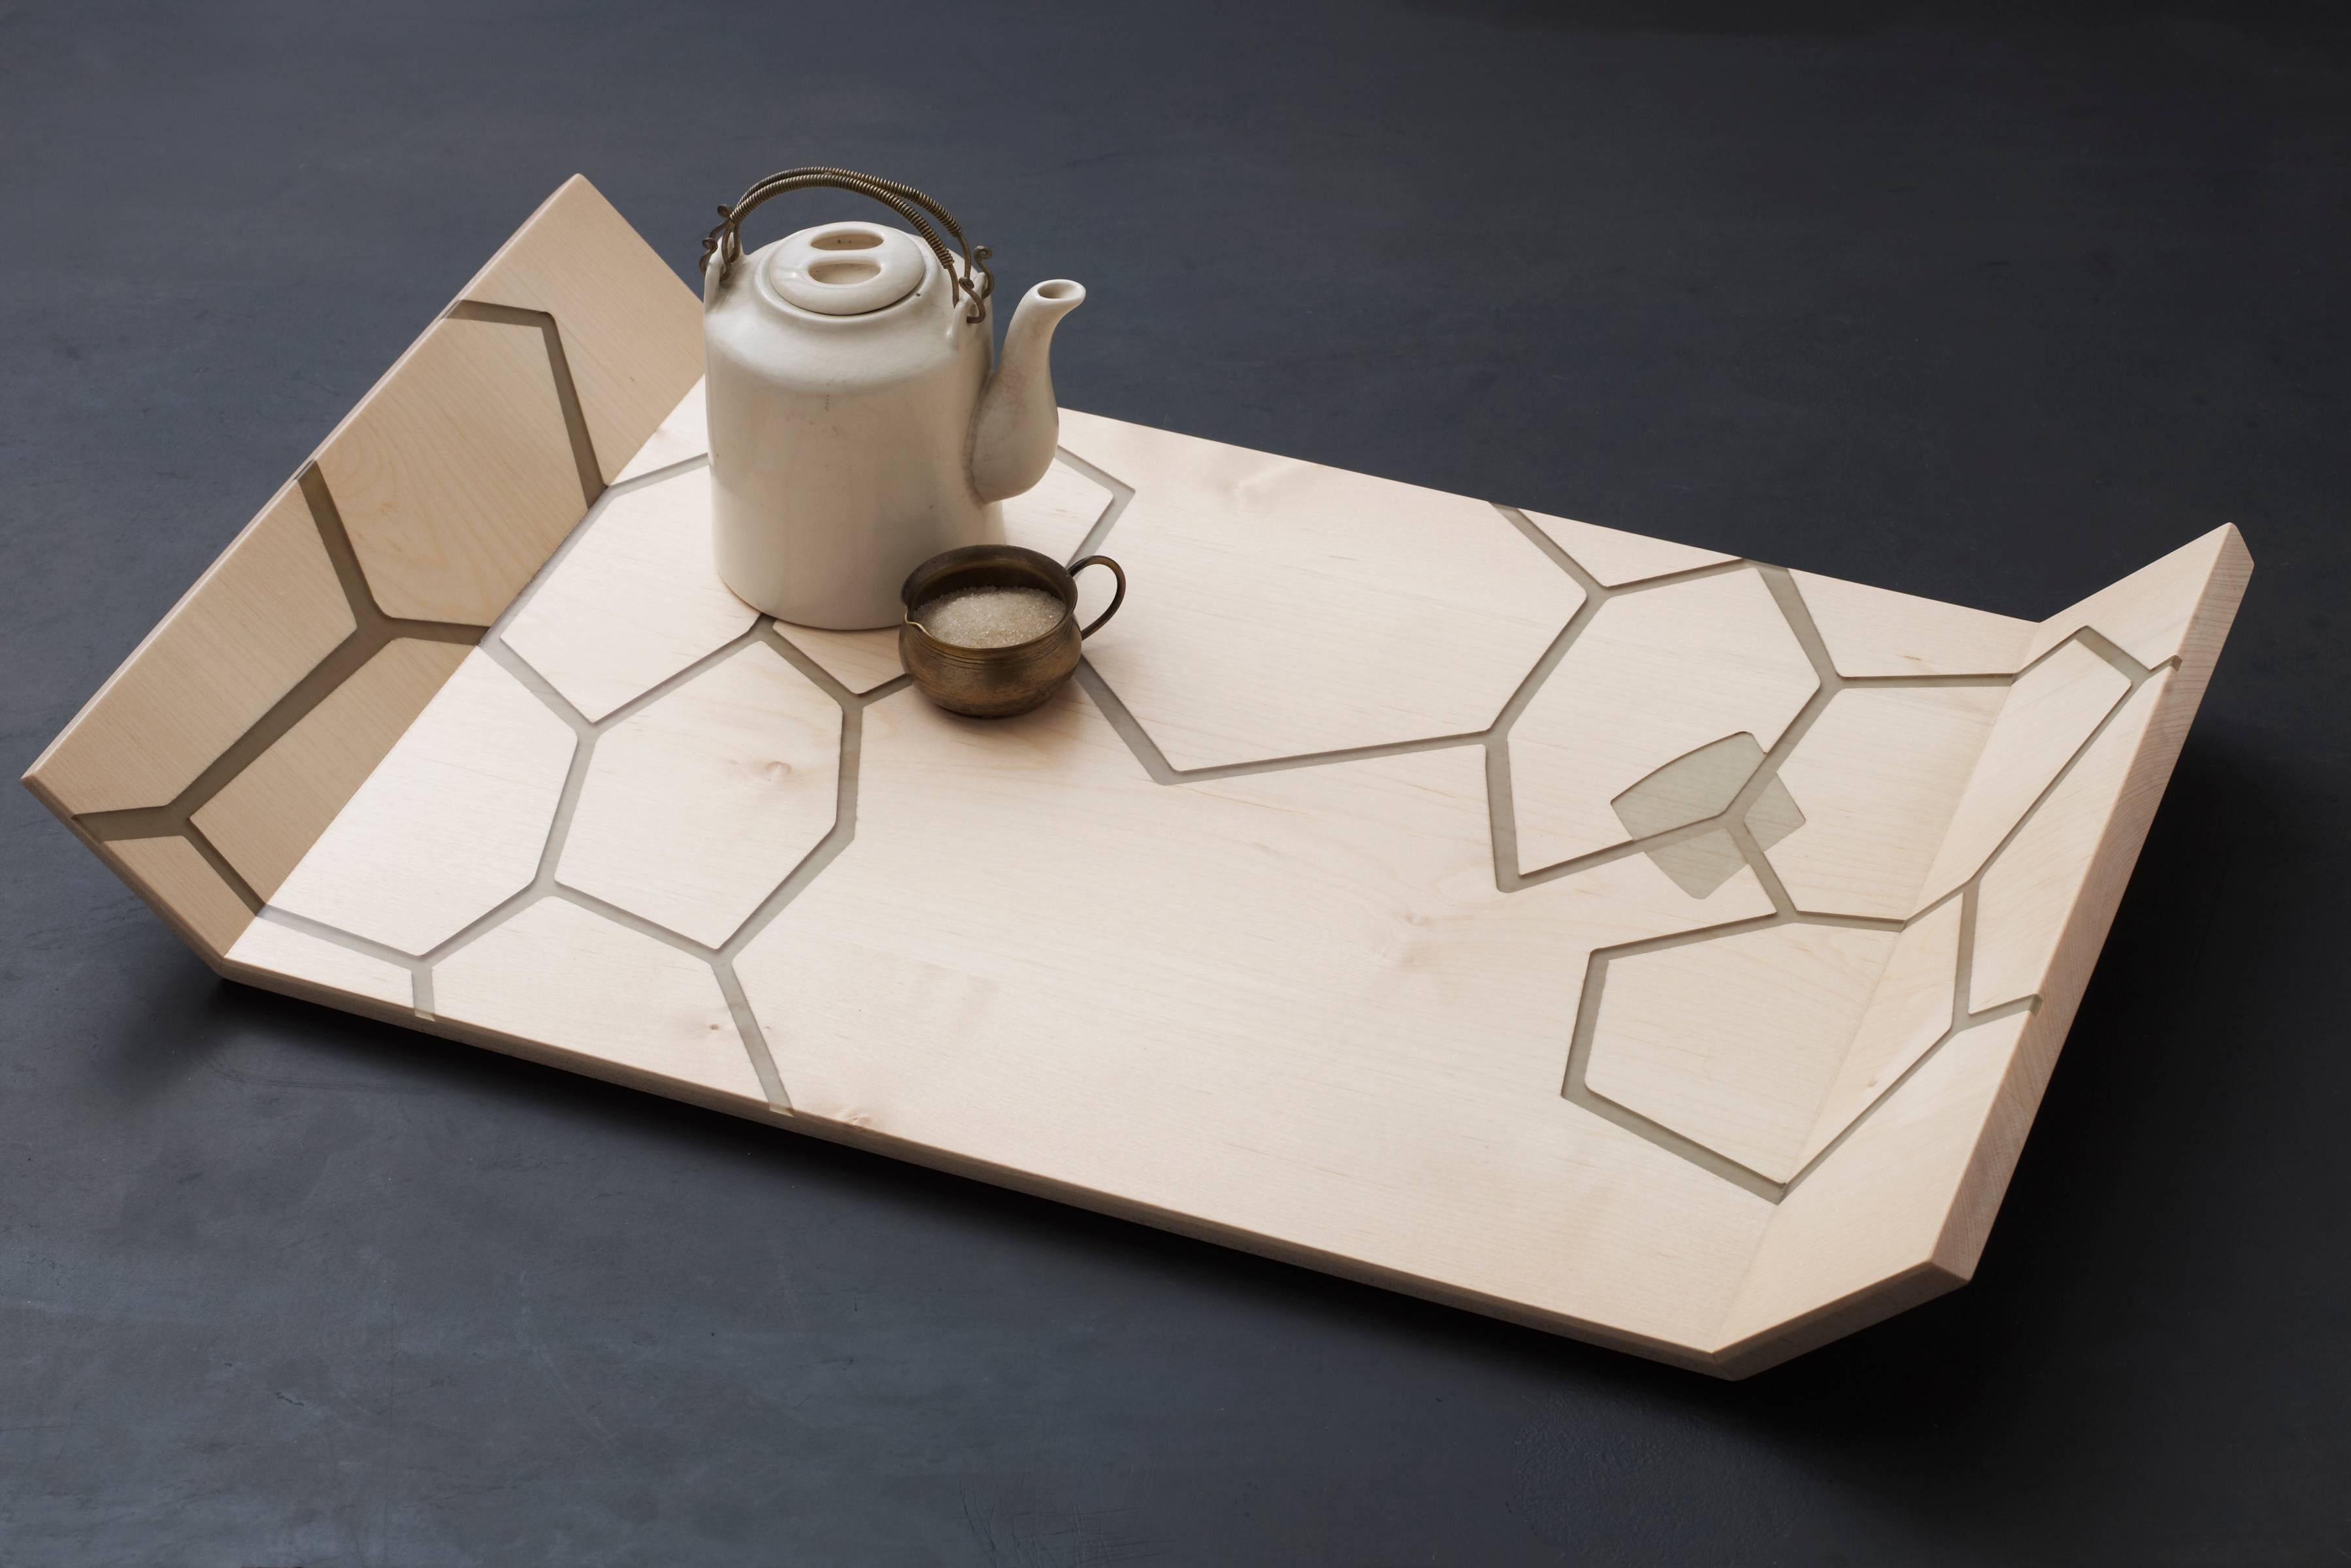 Solid maple serving tray with translucent smoke-colored inlaid resin in our honeycomb design. Inspired by repeated forms and patterns found in nature, and breakfast in bed. 

Carved grooves for handles. Handmade in Brooklyn, NY

19.5 x 11.5